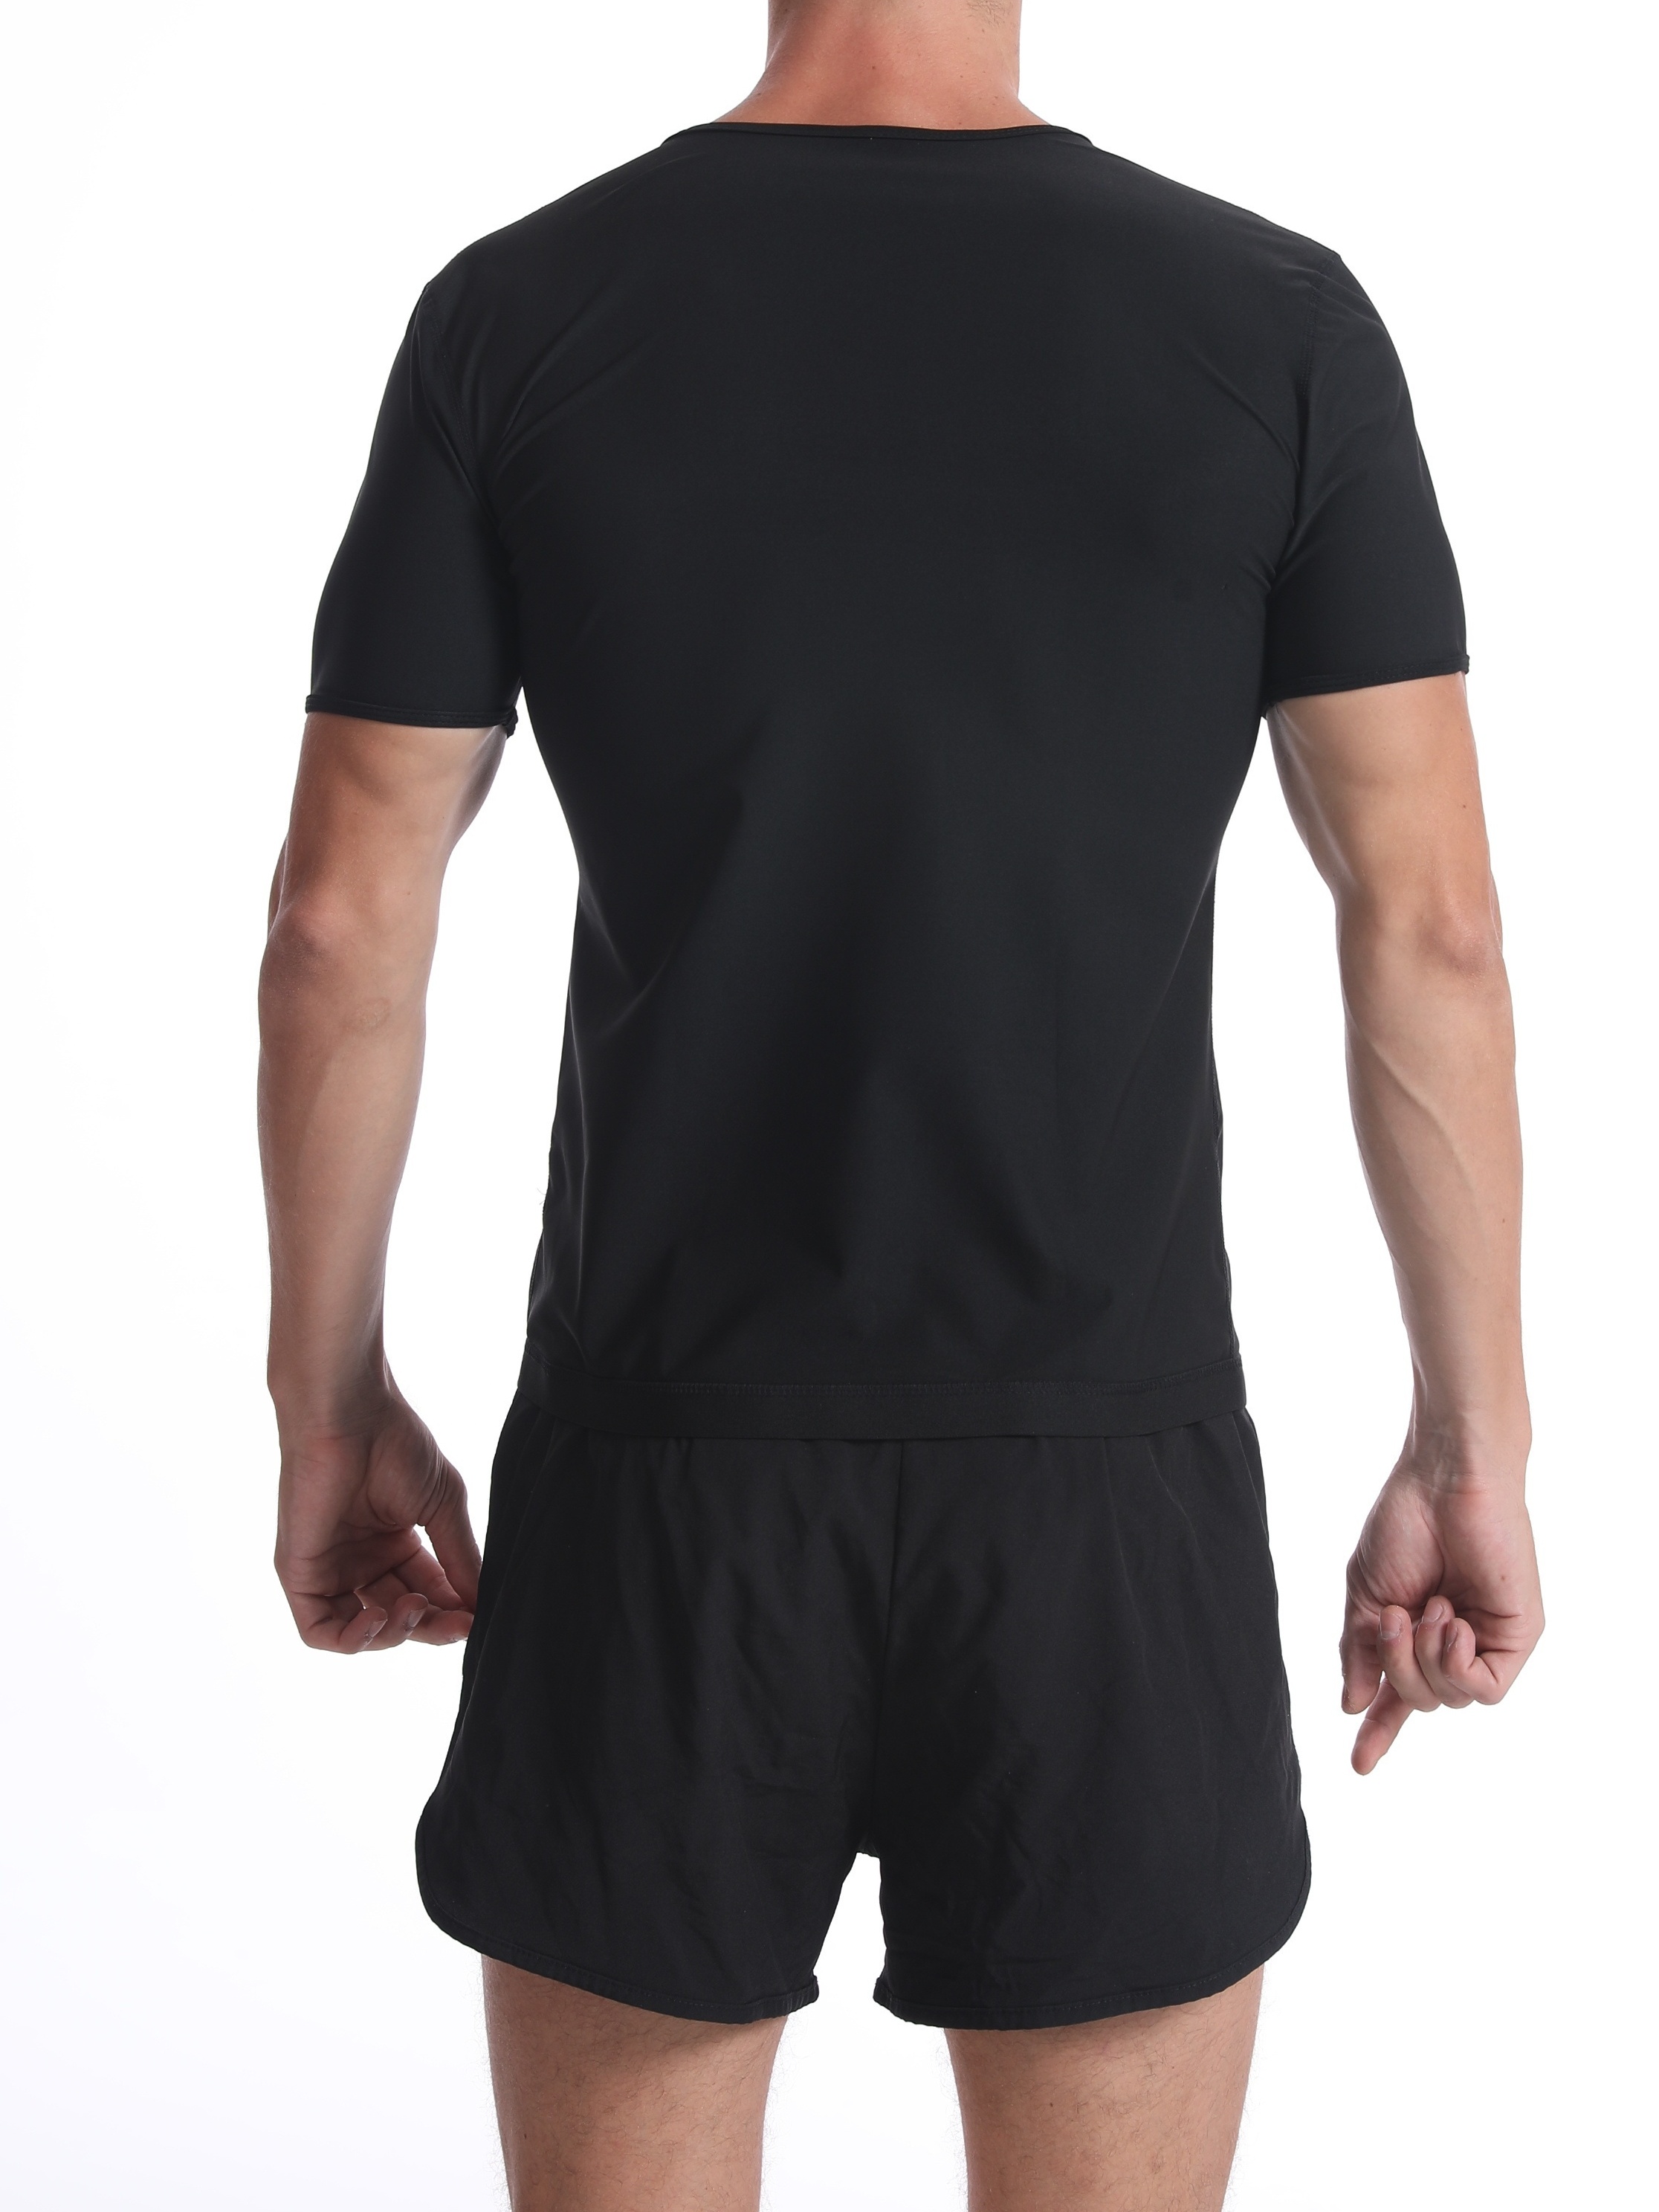 Men's Sweat Wicking Sauna Shirt, Short Sleeves With Non-Slip Treatment,  Tummy Fitness, Gym Shapewear Sports Active Wear Outdoor Running T-shirts